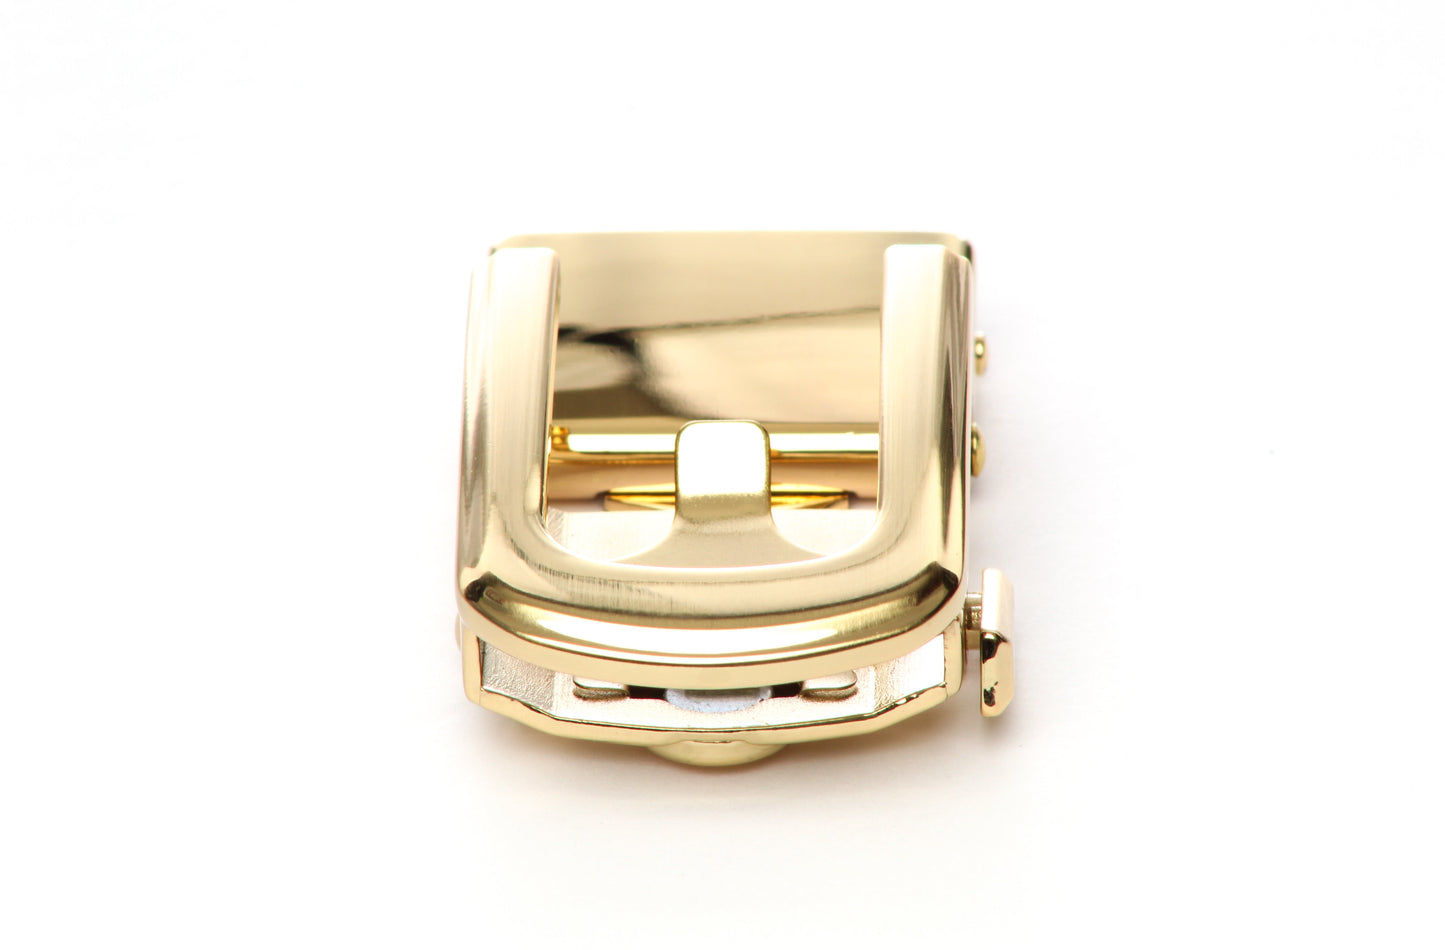 1.25" Traditional with a Curve in Gold - no buckle bar (CAS)